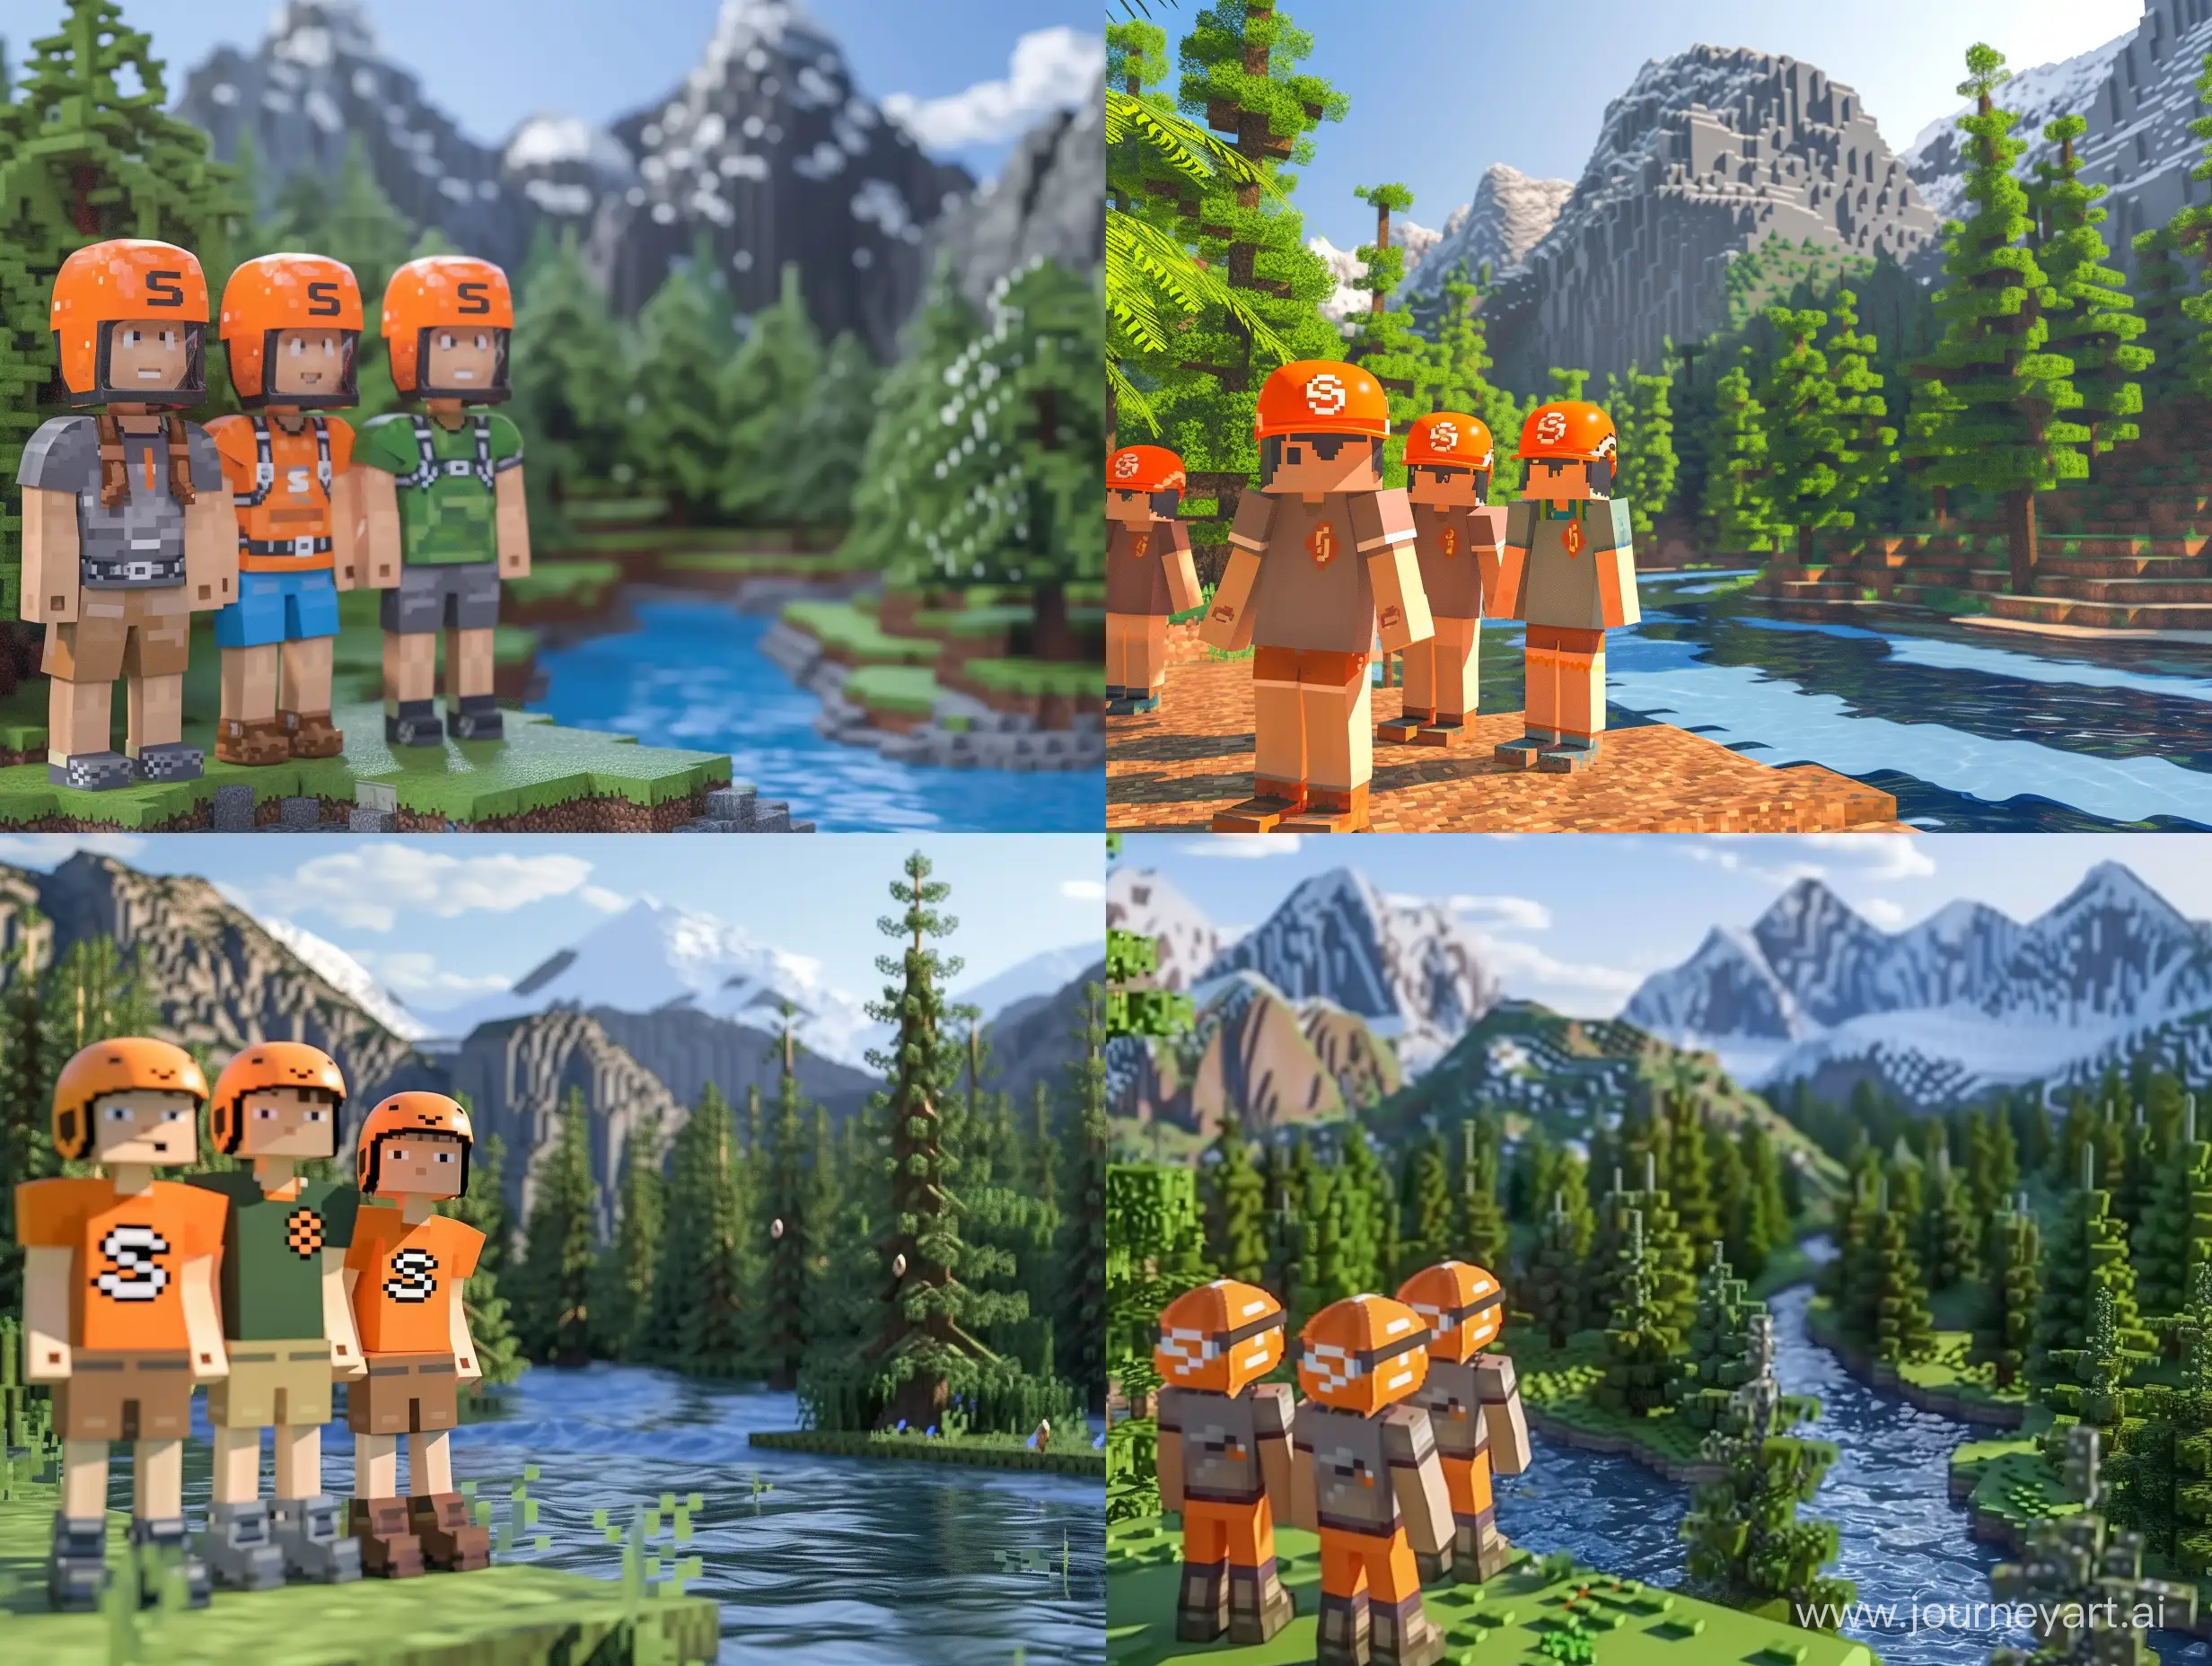 Banner for group, minecraft , nature tones, trees and rivers with mountains in background, the group of four friends, wearing orange helmet with the letter "s" on it. Wearing shirts, shorts,  They're standing in the left side of picture. 